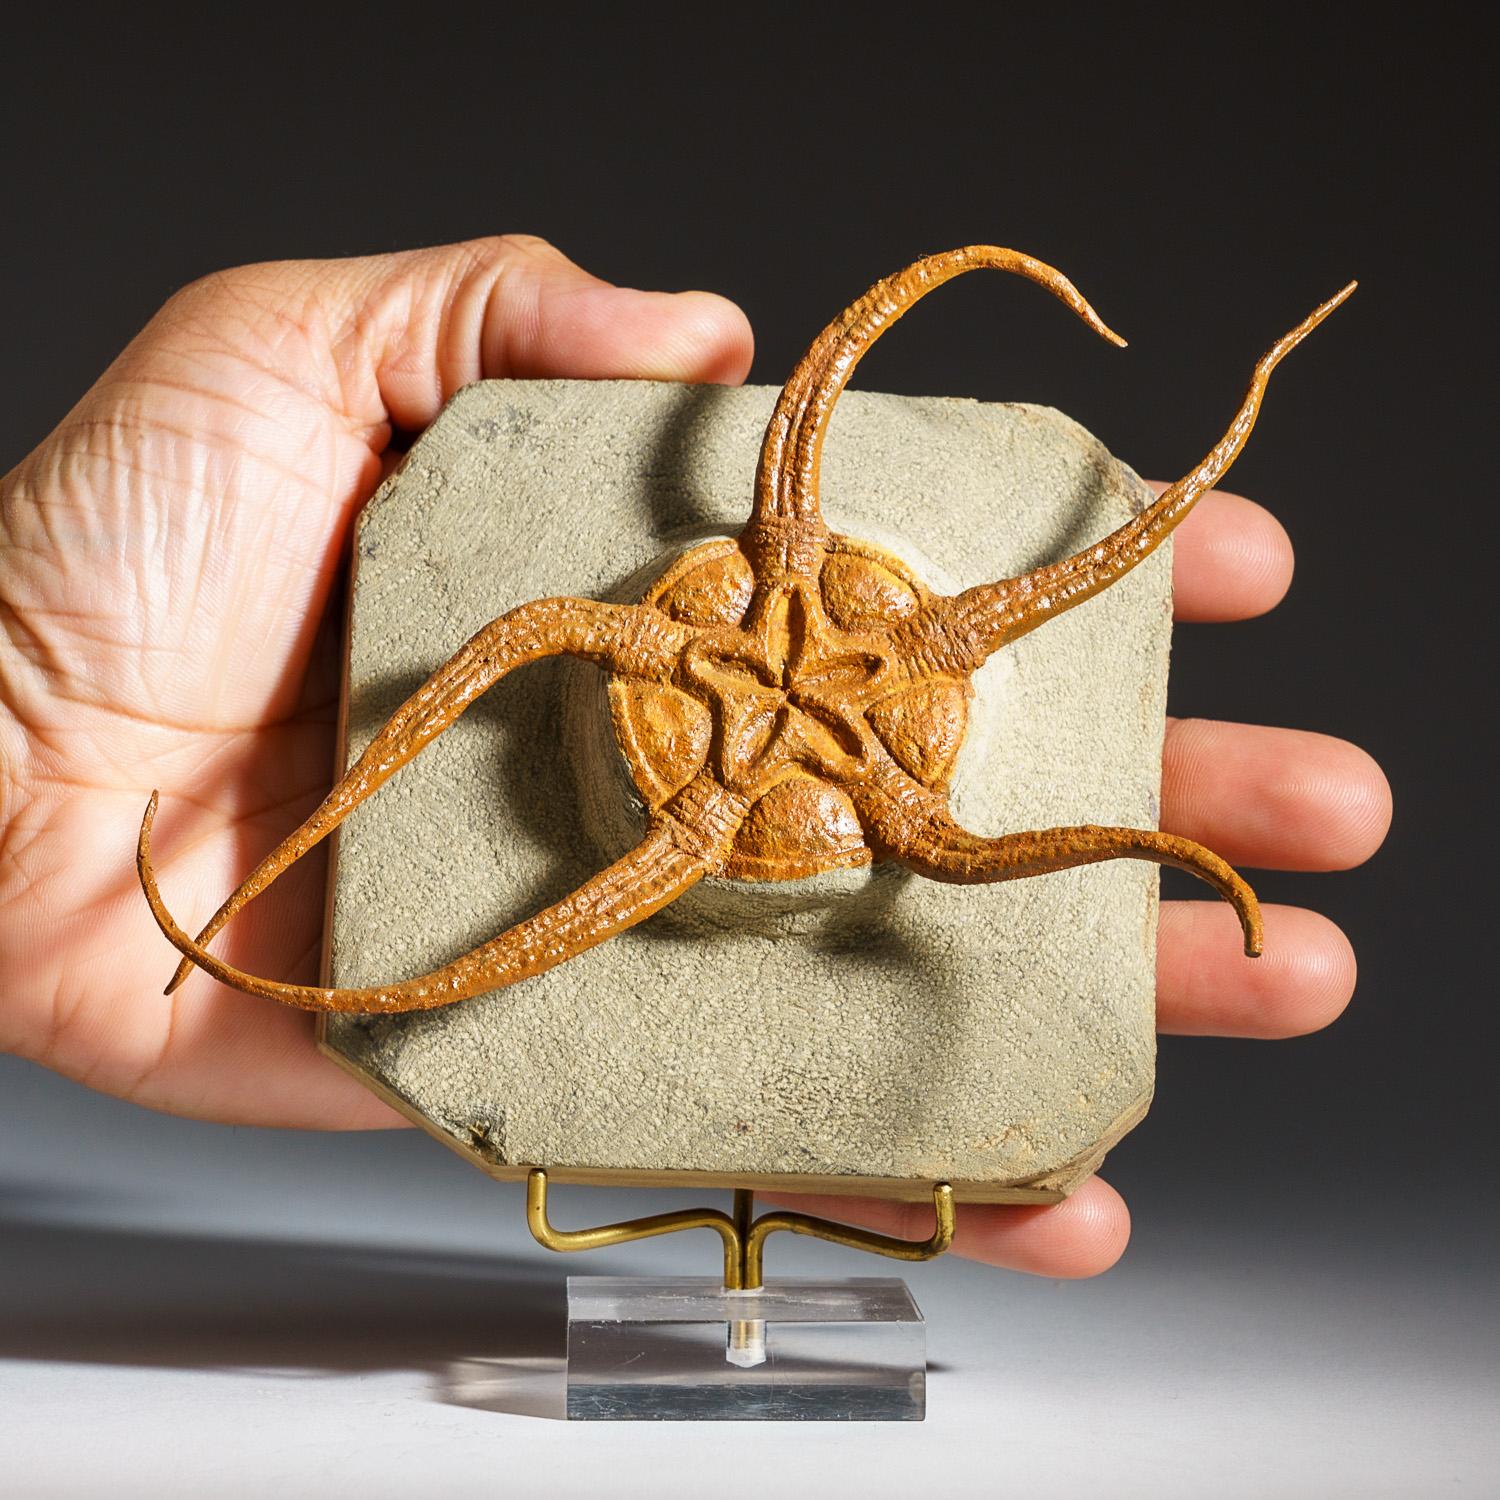 Genuine, museum-quality, Ophiuroidea Brittle Star Fossil. Ophiura ophiura or the serpent star is a species of brittle star in the order Ophiurida. This type of species is known for its circular central disc and five radially arranged, narrow arms.